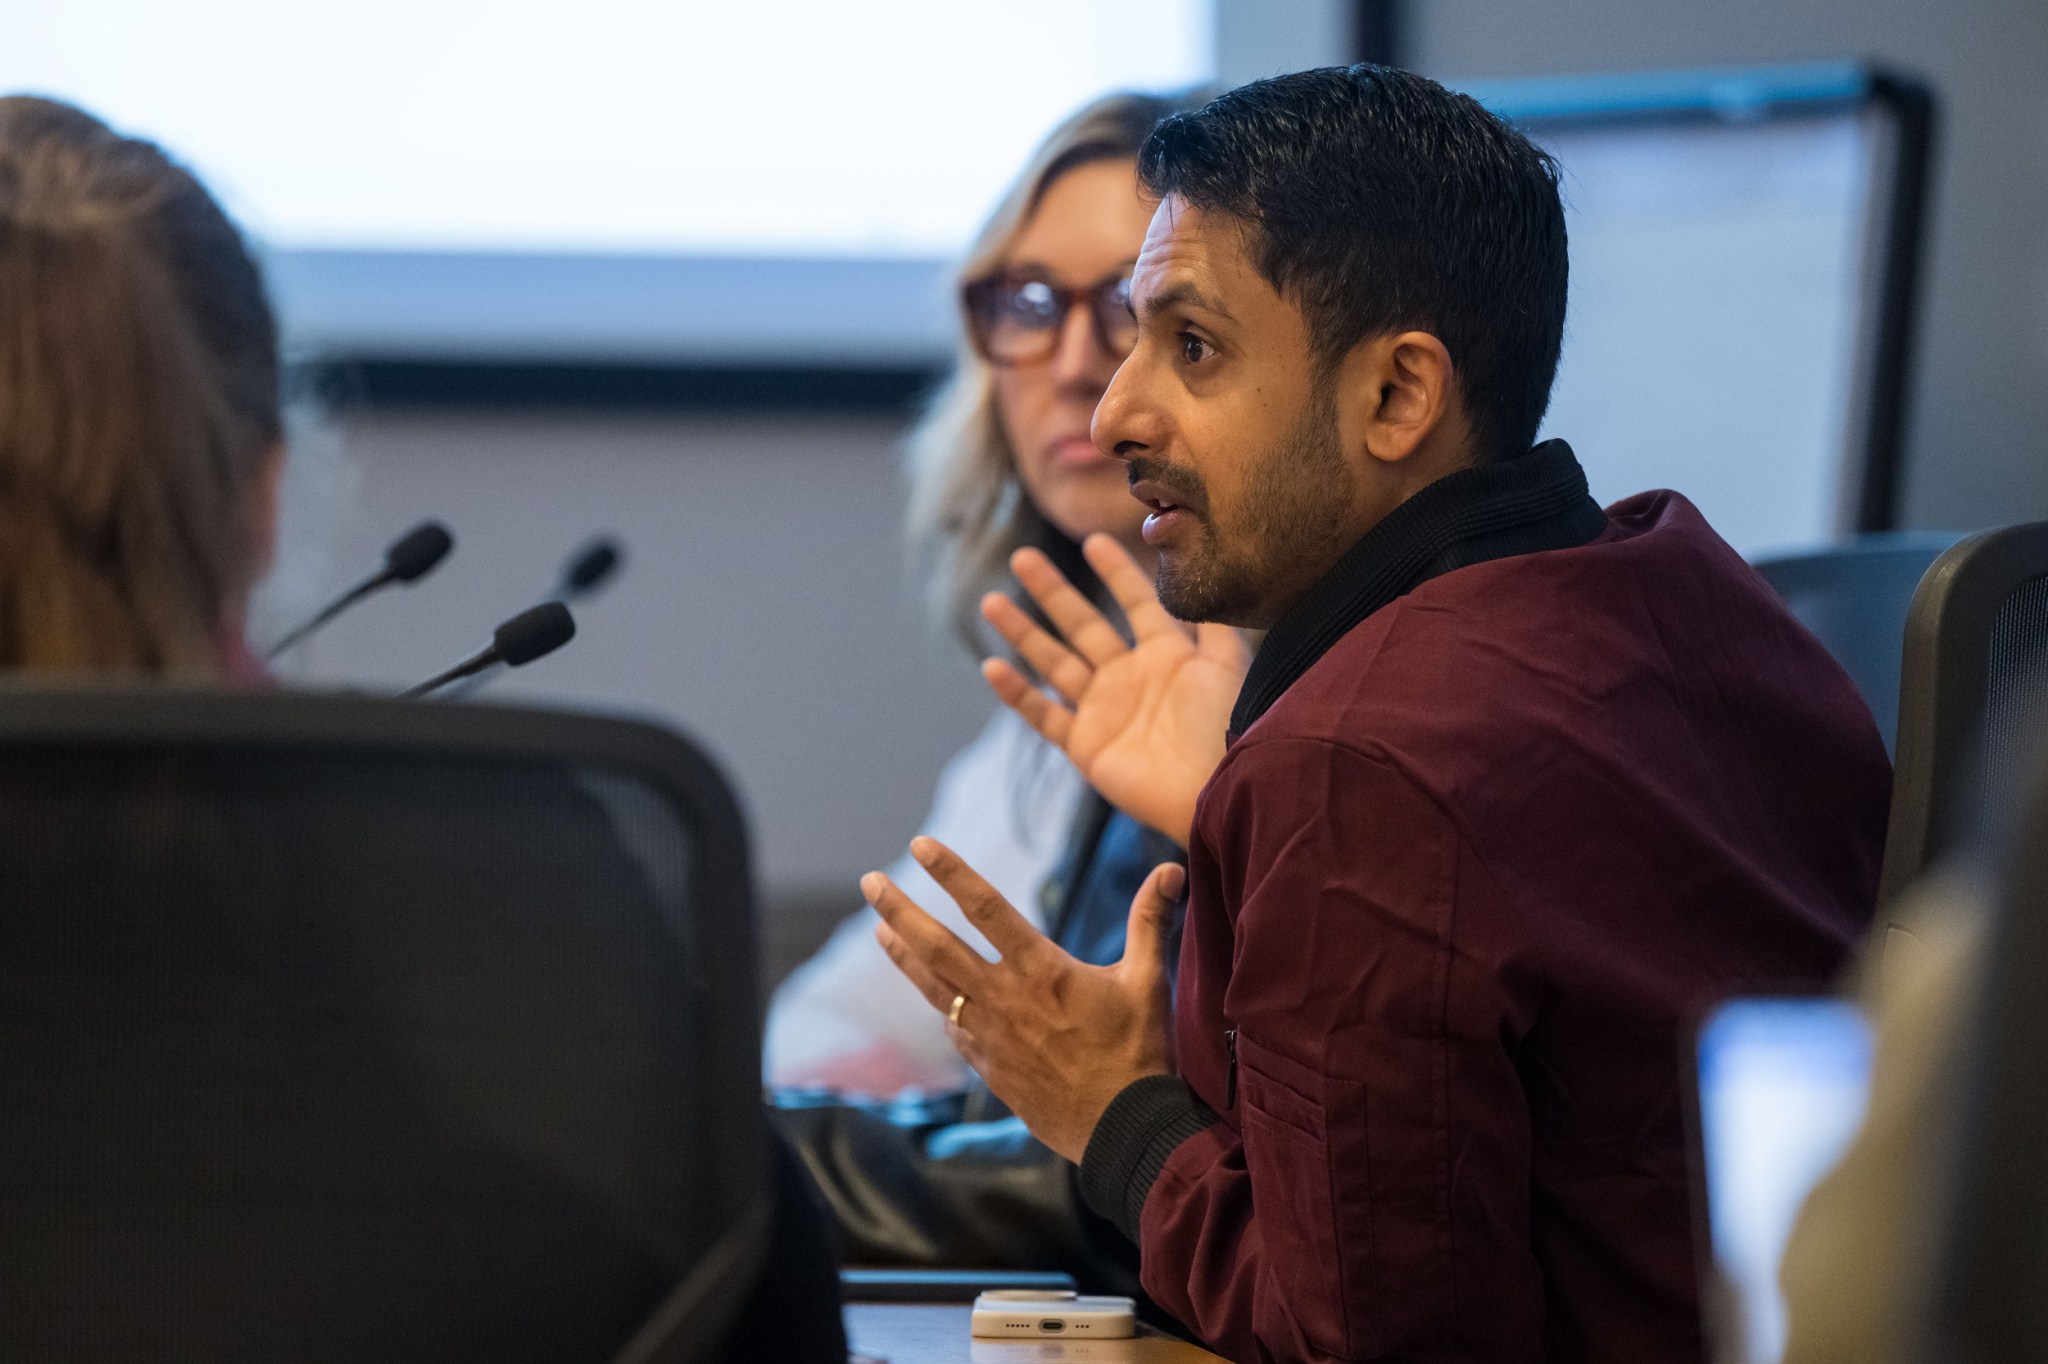 Dr. Rahul Suresh, NASA Commercial Low Earth Orbit Development Program medical officer, participates in a discussion during the medical operations meeting series. Topics of discussion included medical risk management, medical selection standards, medical system design, and more.